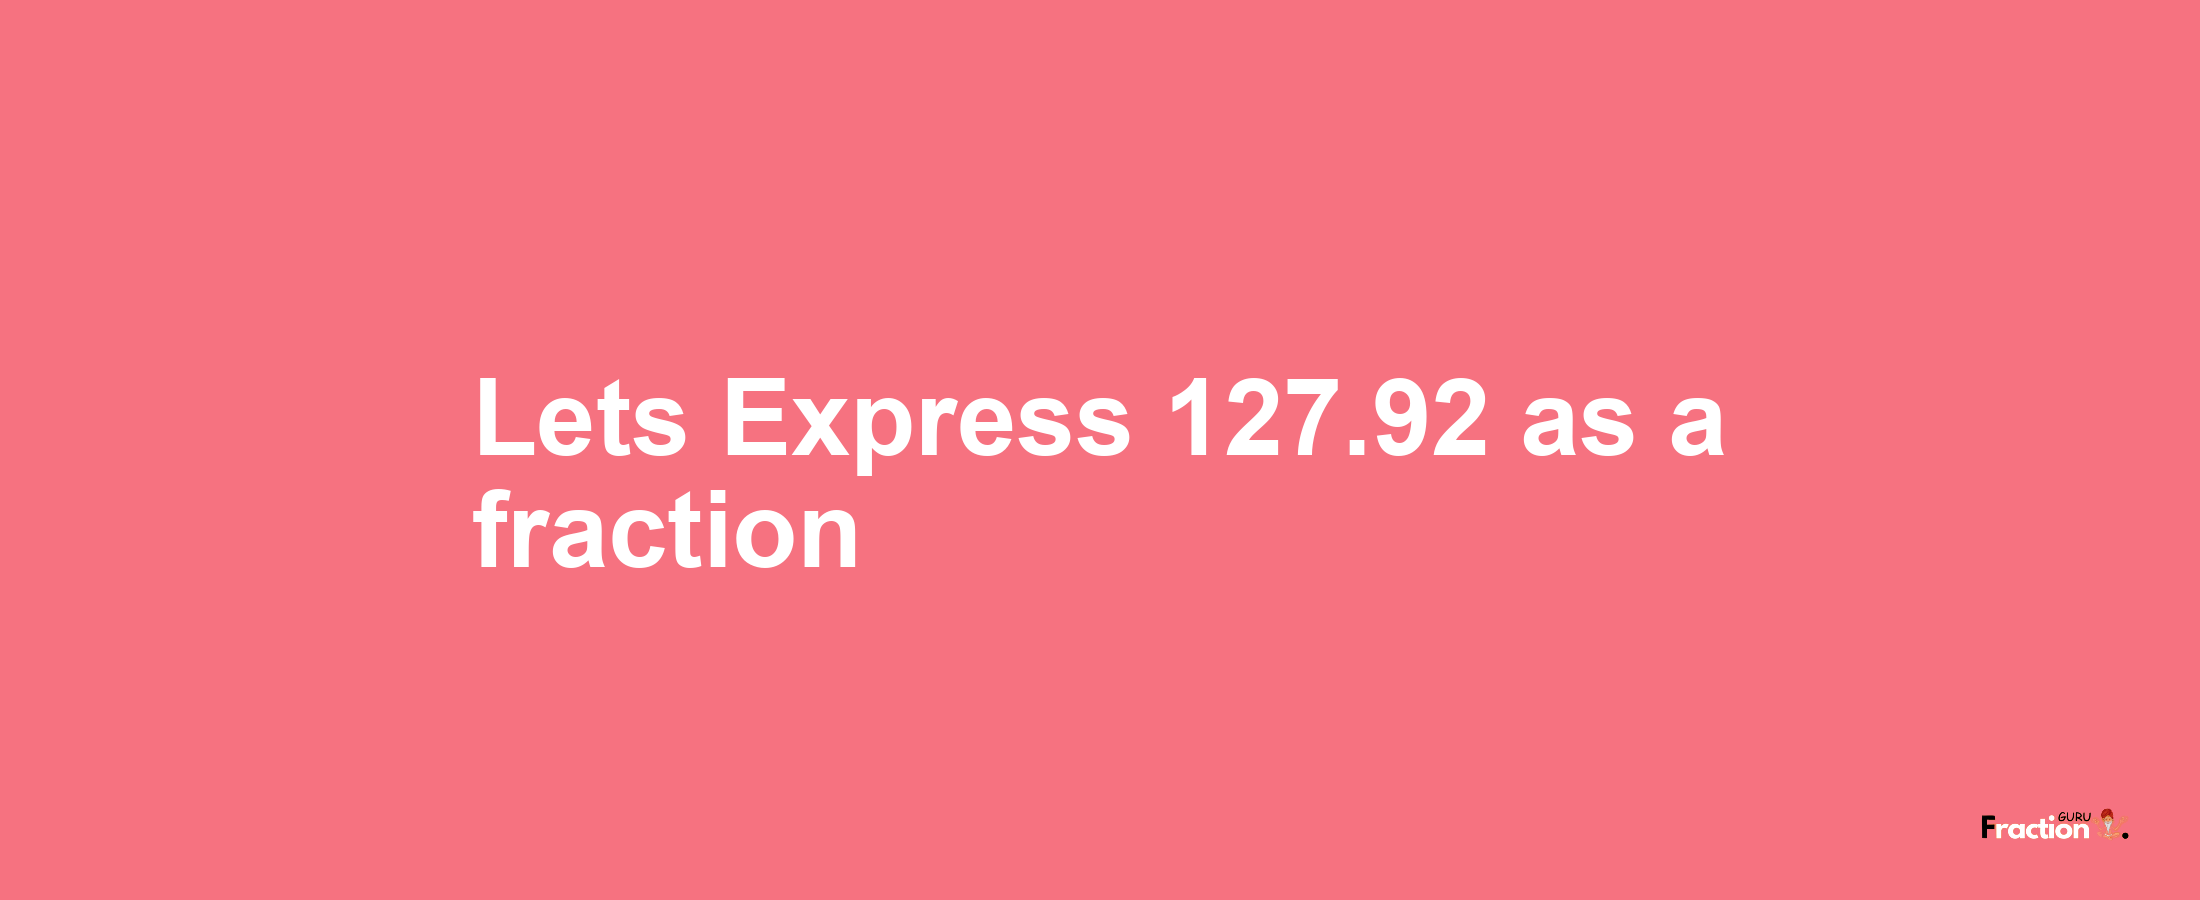 Lets Express 127.92 as afraction